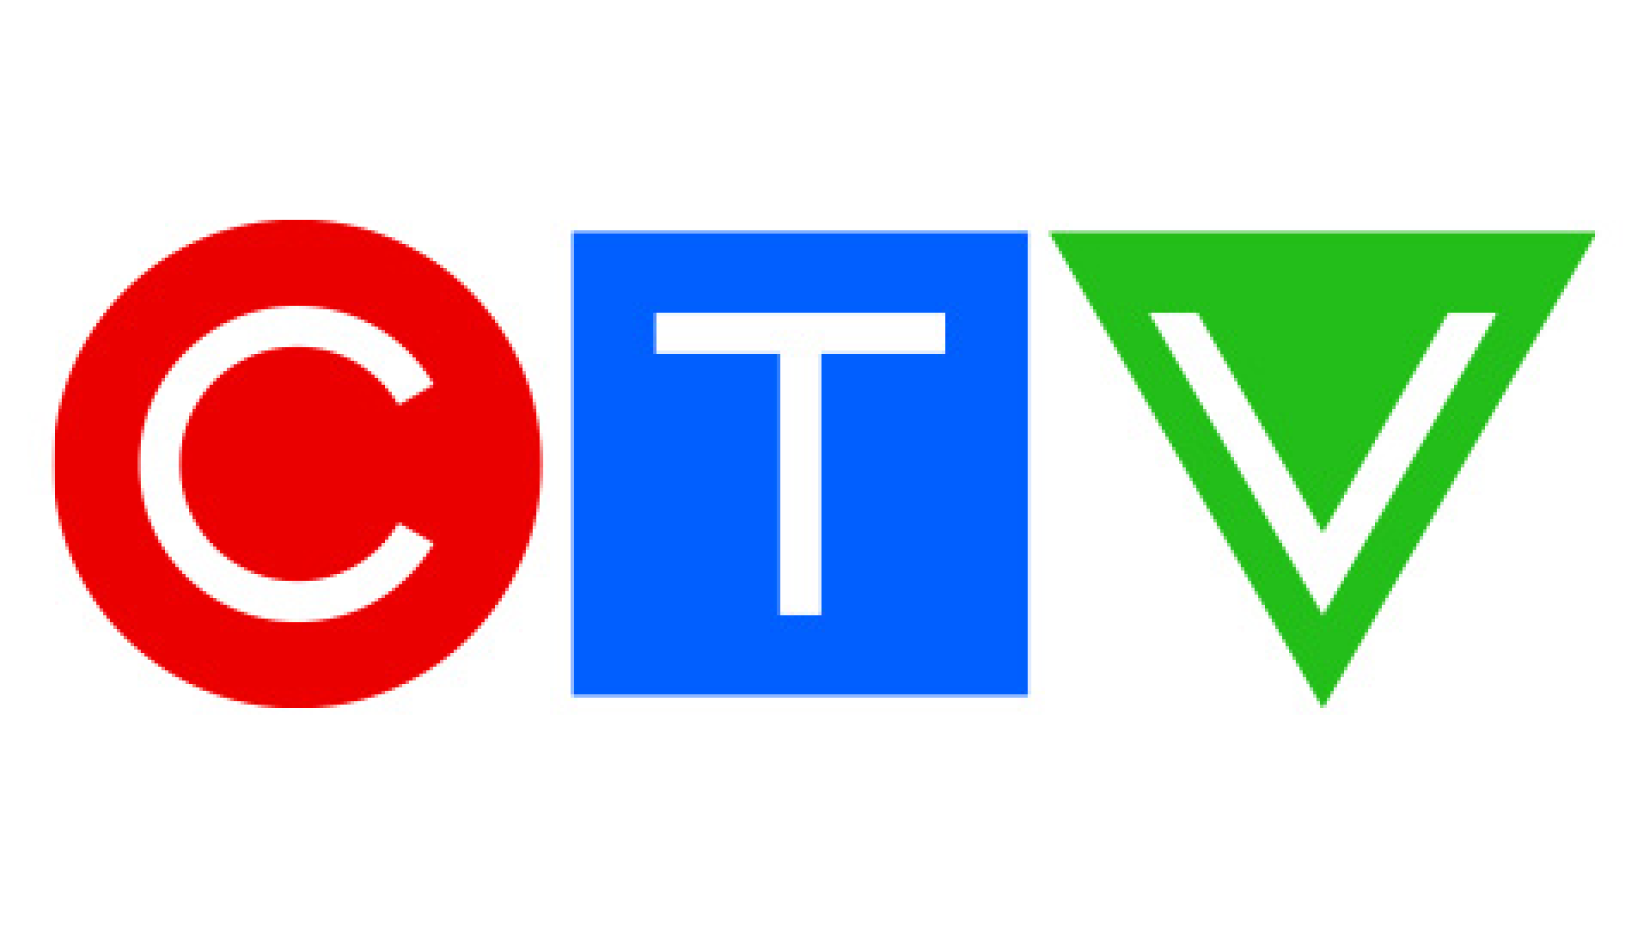 Once the Fibe TV receiver has restarted, check to see if your TV picture has returned and the Fibe TV receiver responds to the remote control.